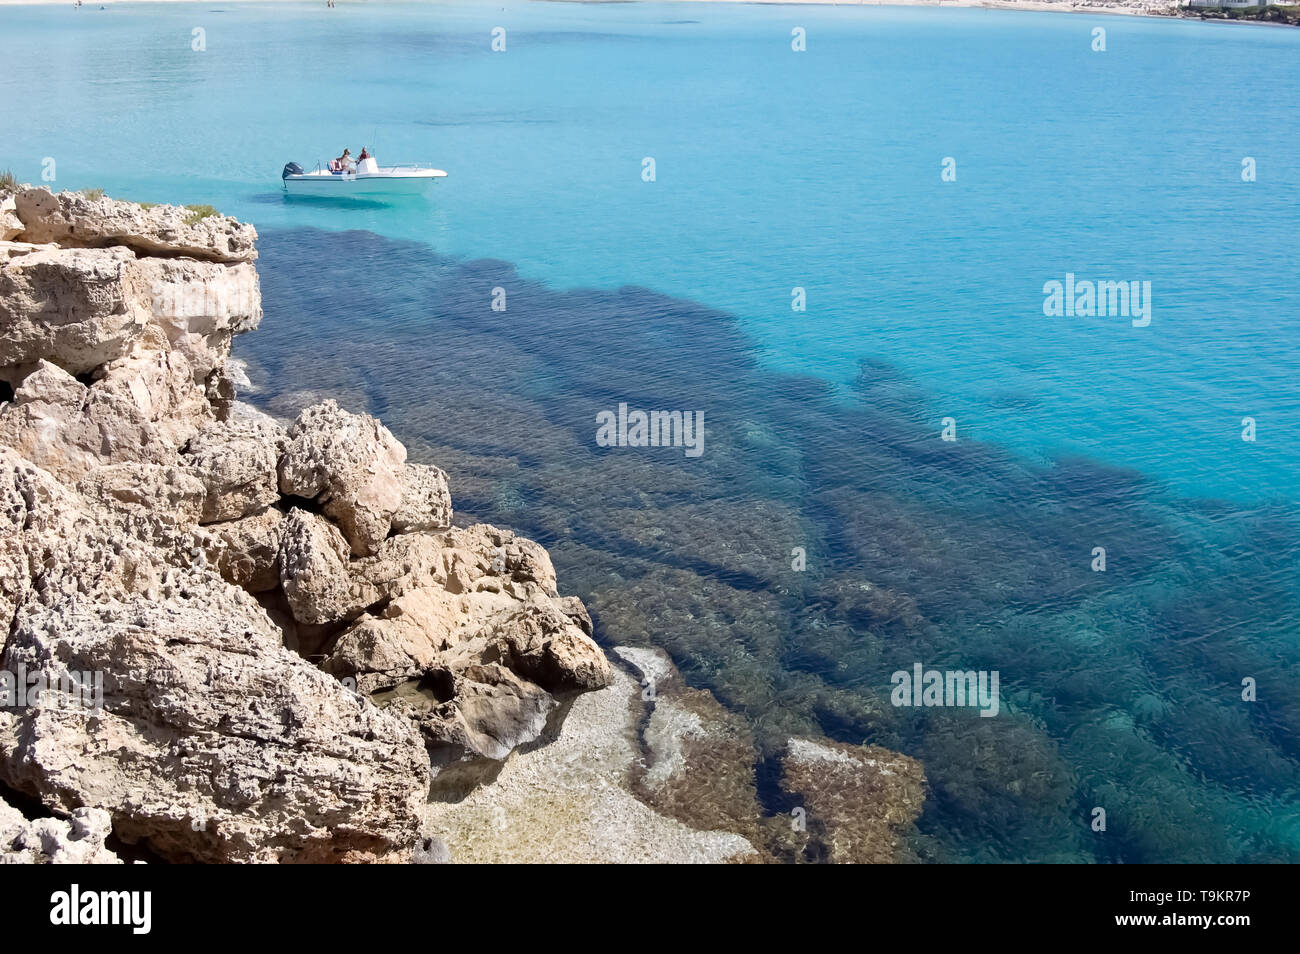 White boat and transparent blue sea near the rocky shore in the resort of Ayia Napa, Cyprus. Stock Photo